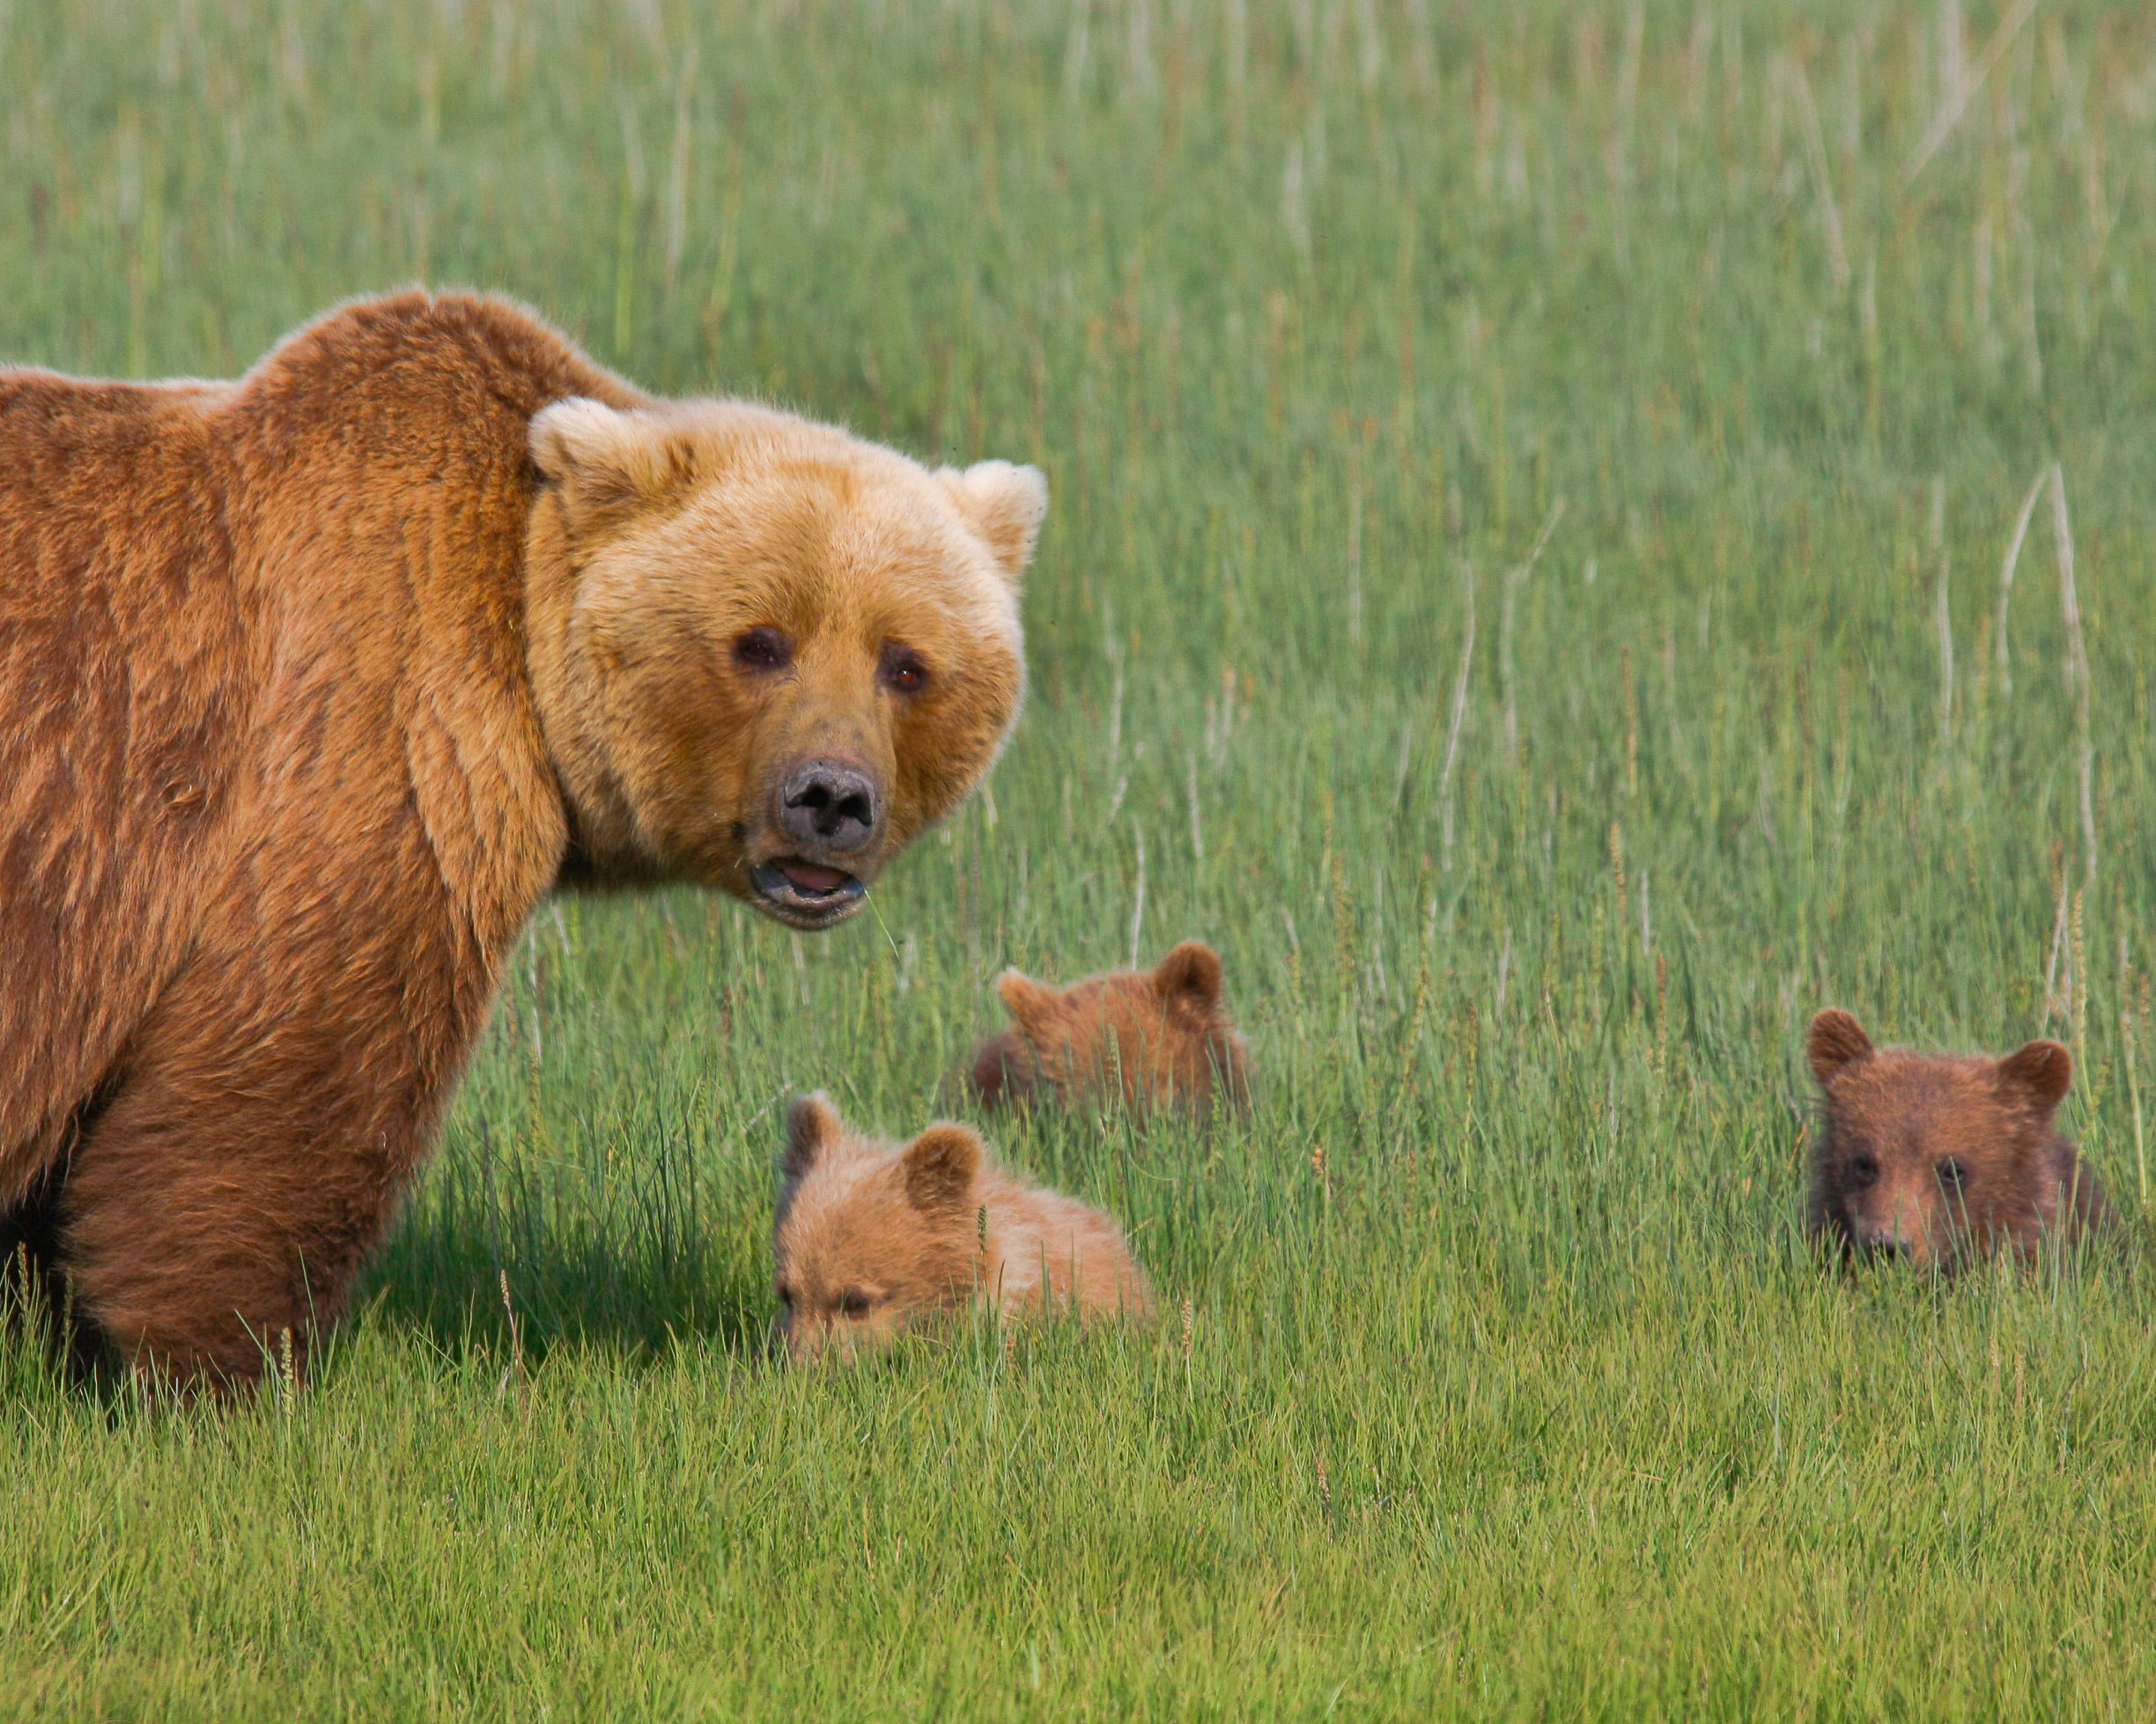 Bear watching in Alaska: a mother bear and her cubs in the grass.